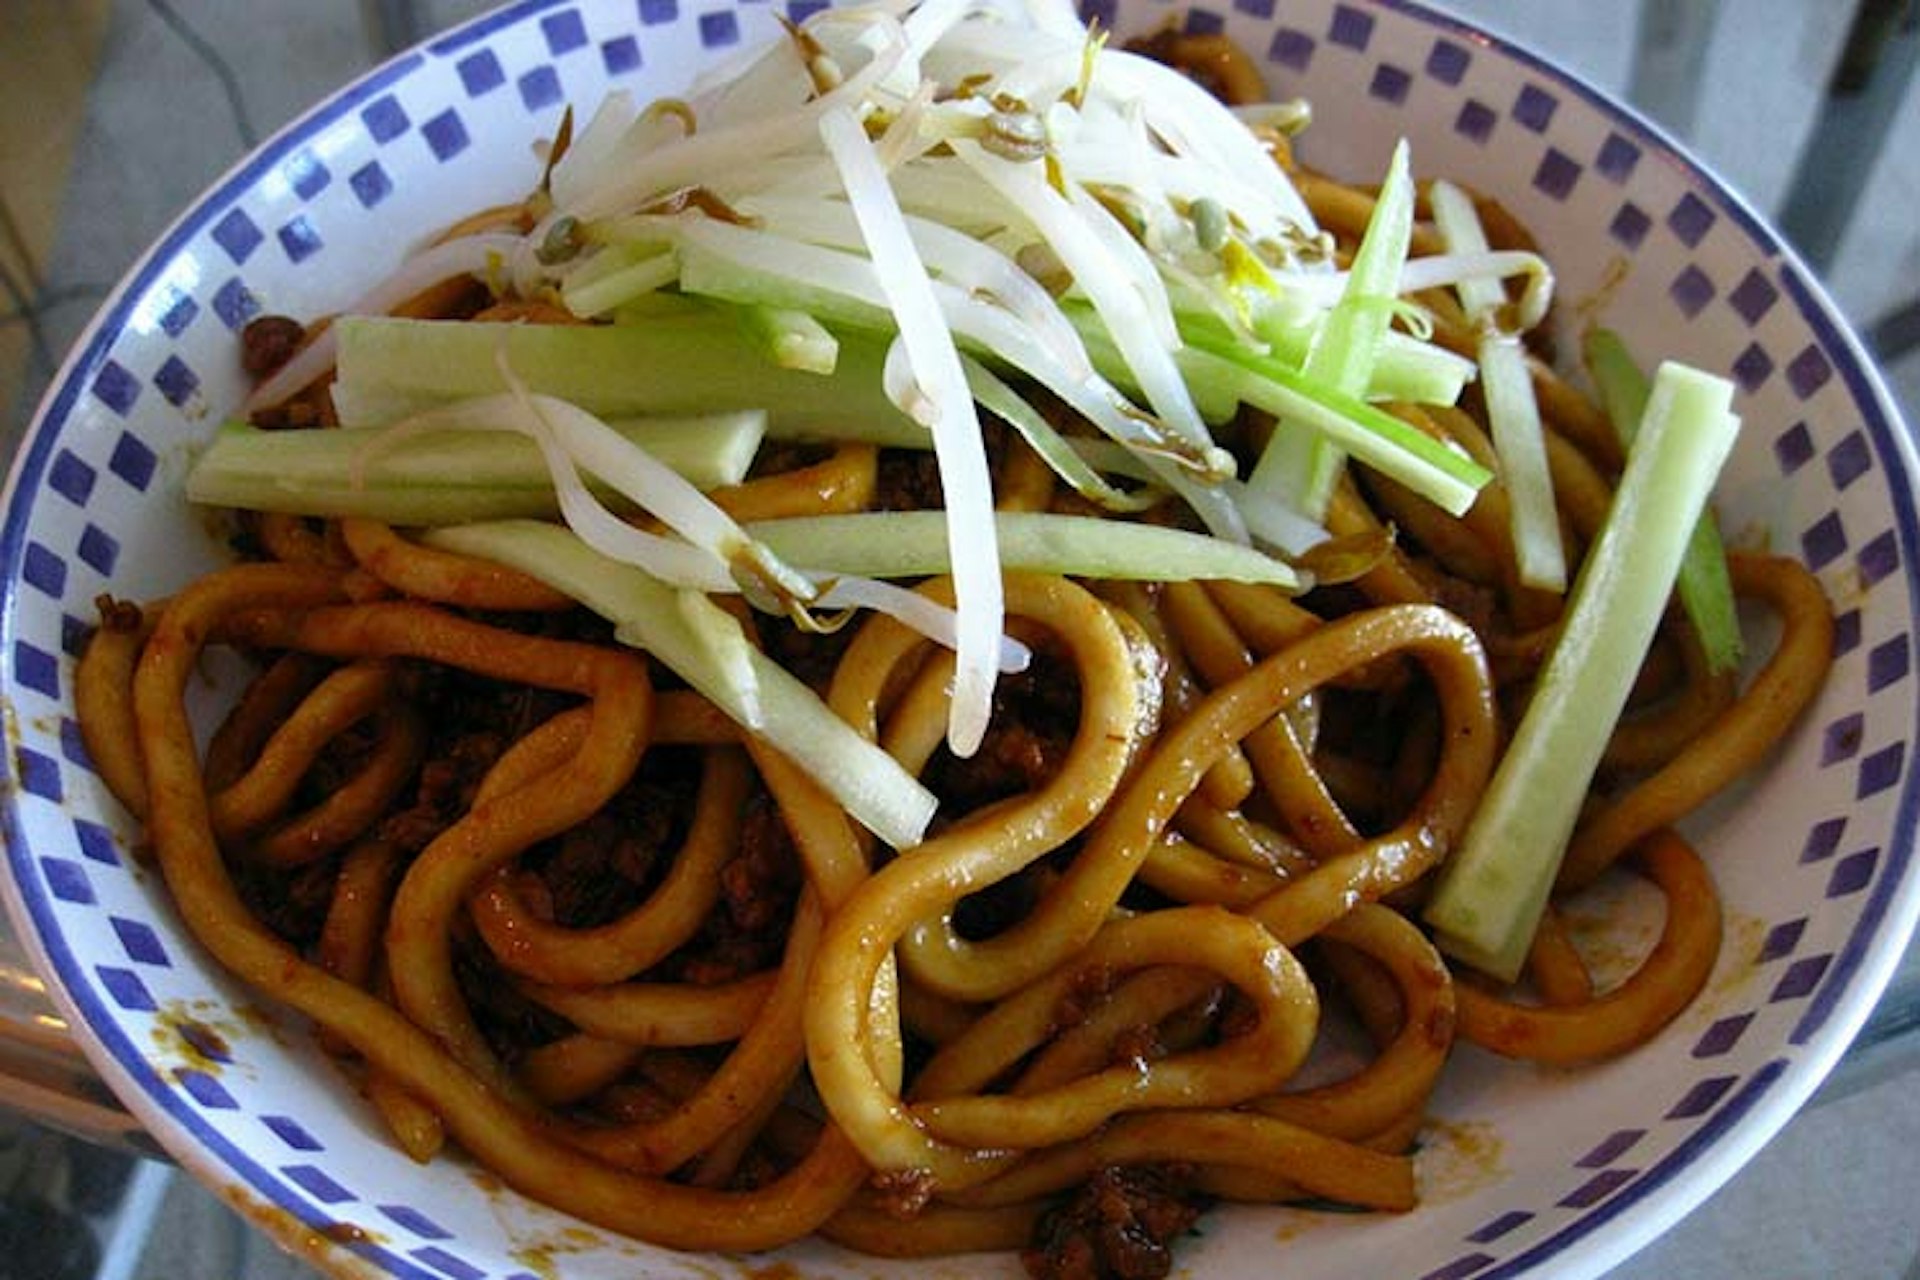 Fresh Zhajiangmian with spring onions and sprouts. Image by Glen MacLarty / CC BY 2.0